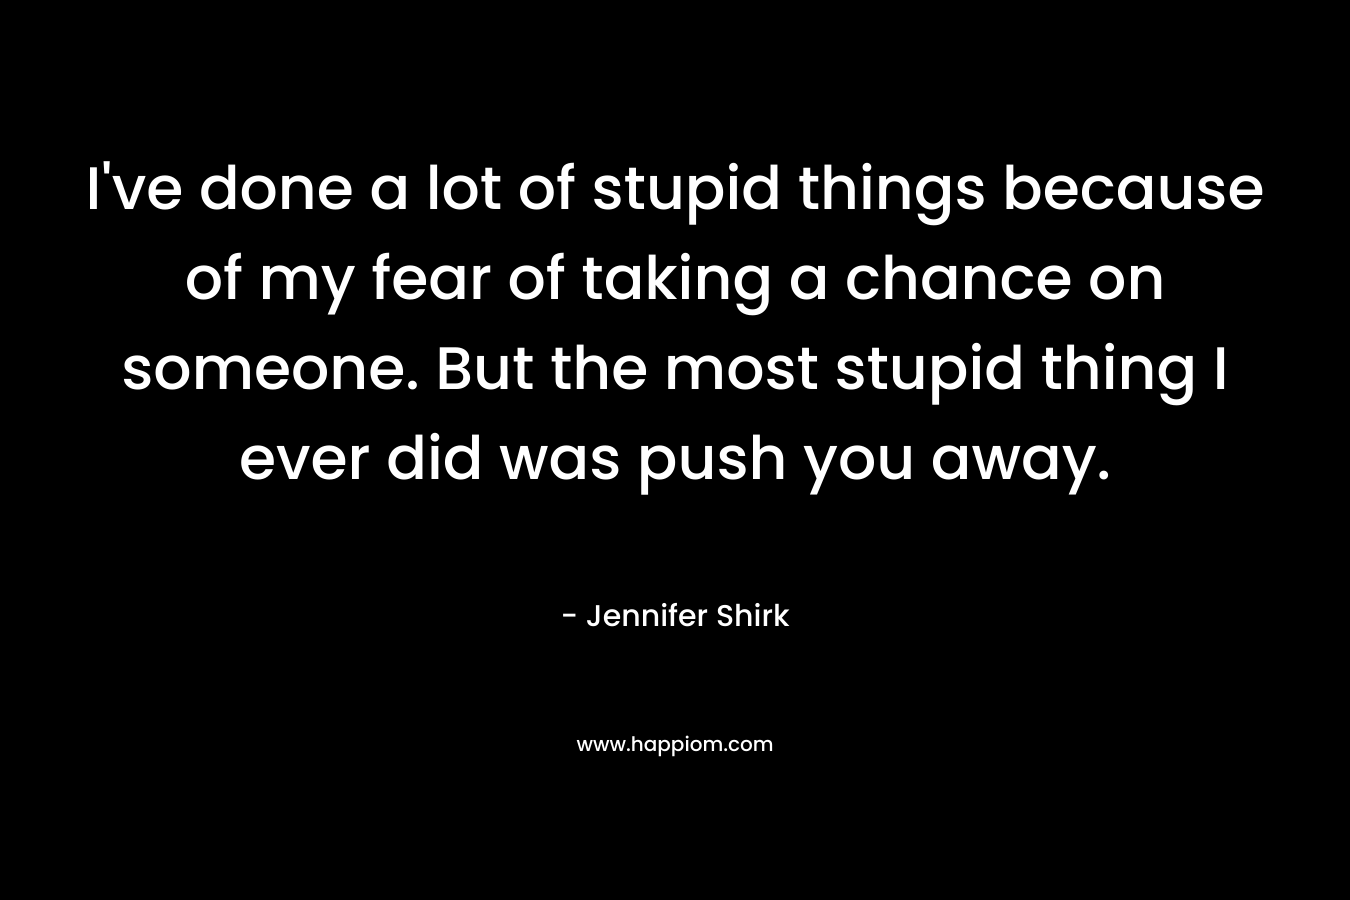 I've done a lot of stupid things because of my fear of taking a chance on someone. But the most stupid thing I ever did was push you away.